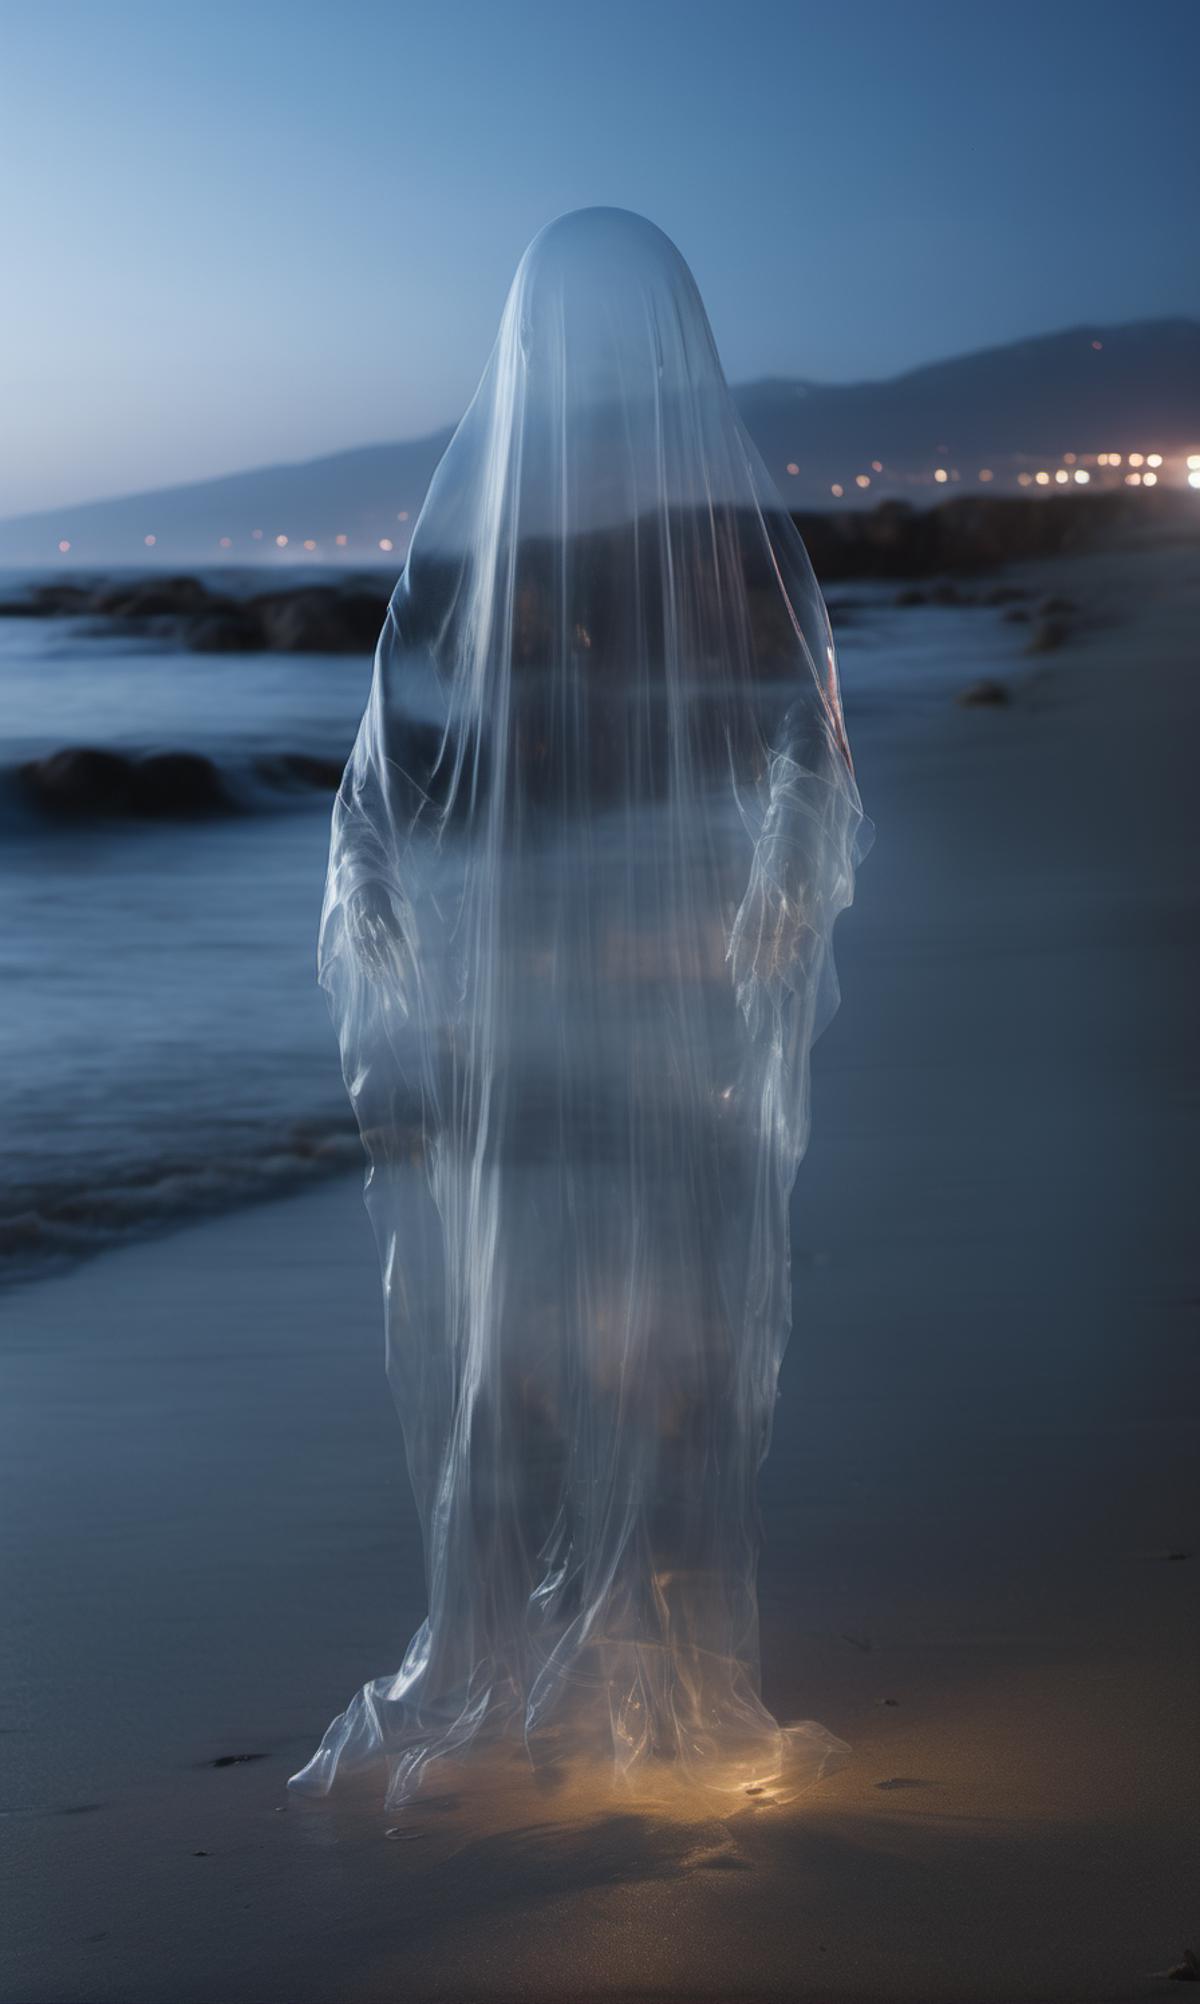 A person wearing a plastic bag on a beach at night.